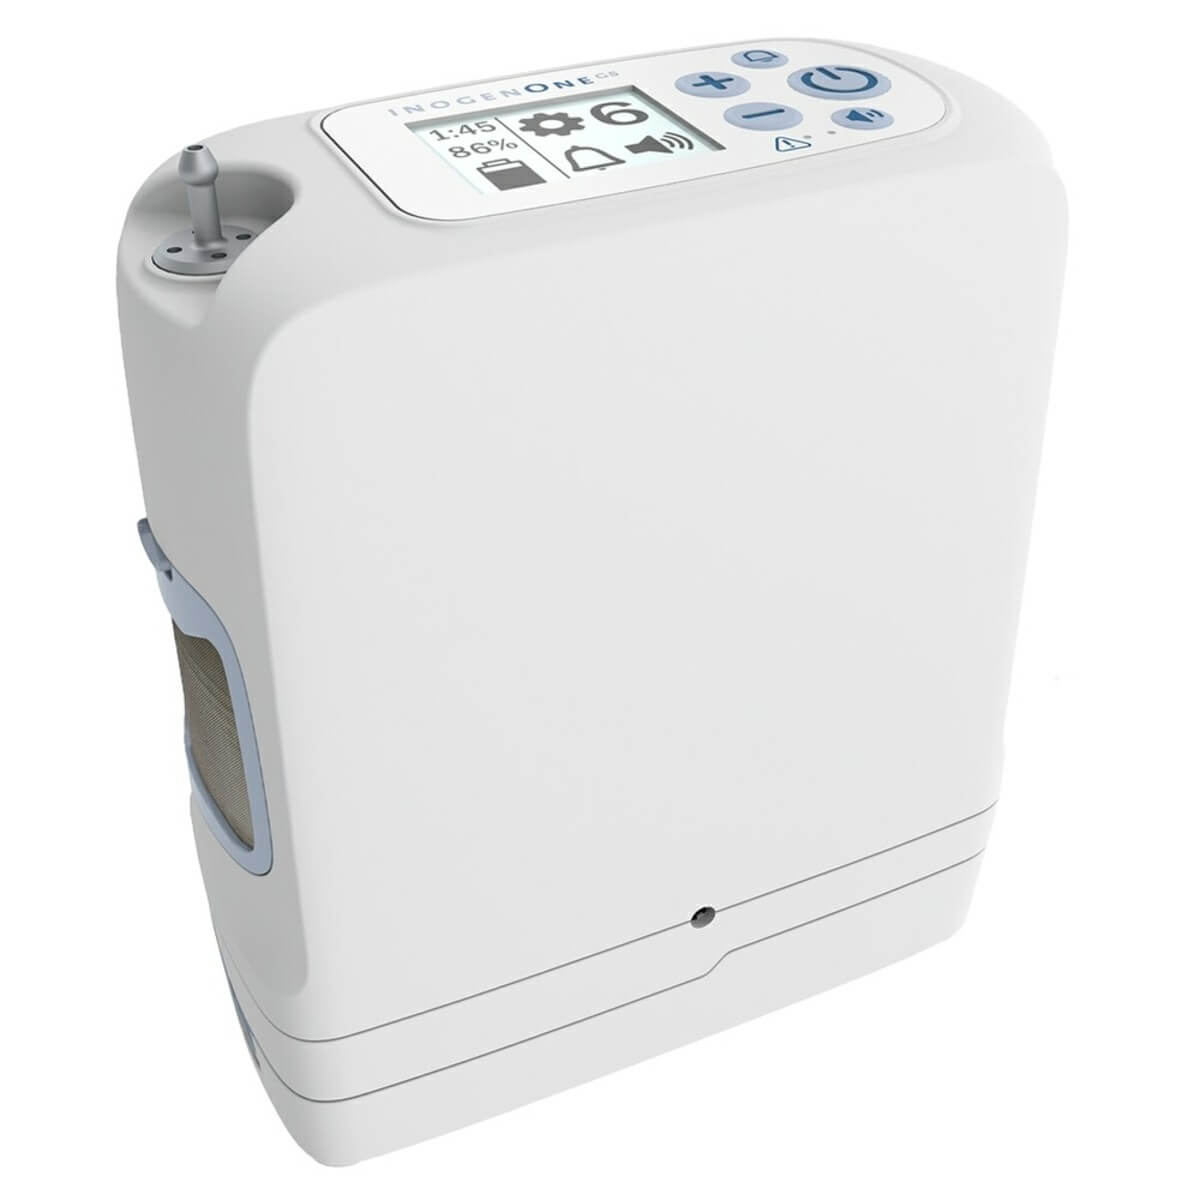 Inogen One G5 Portable Oxygen Concentrator with 3-year warranty and ...